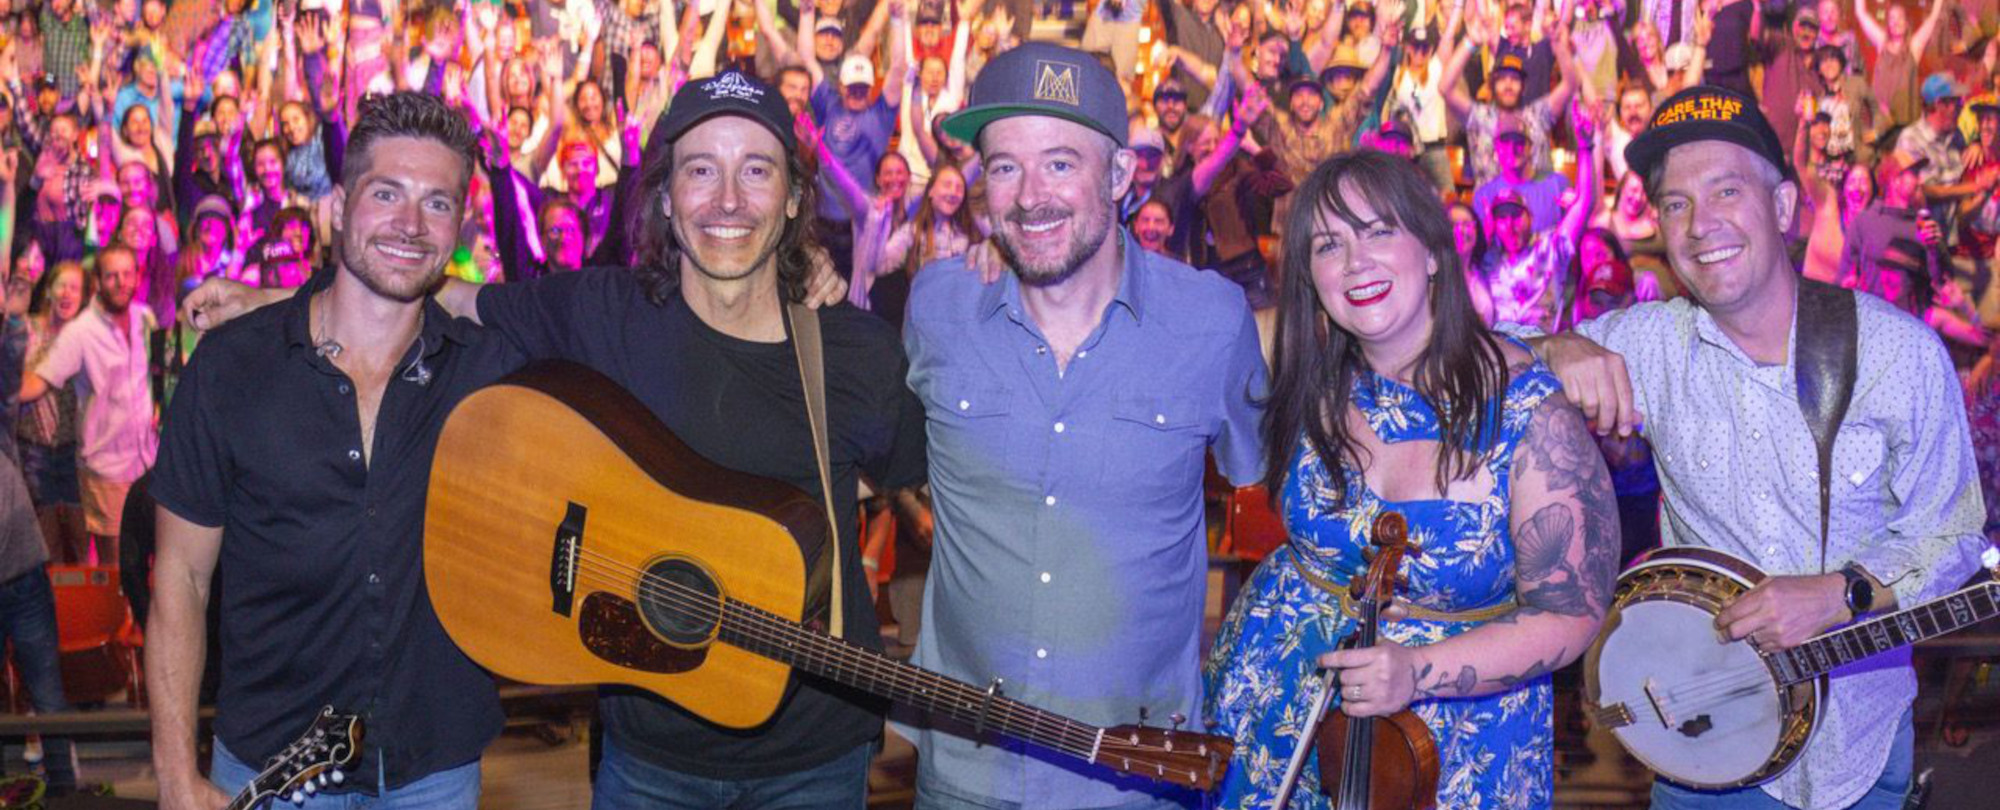 Exclusive Premiere: Yonder Mountain String Band Releases New Single, “If Only”